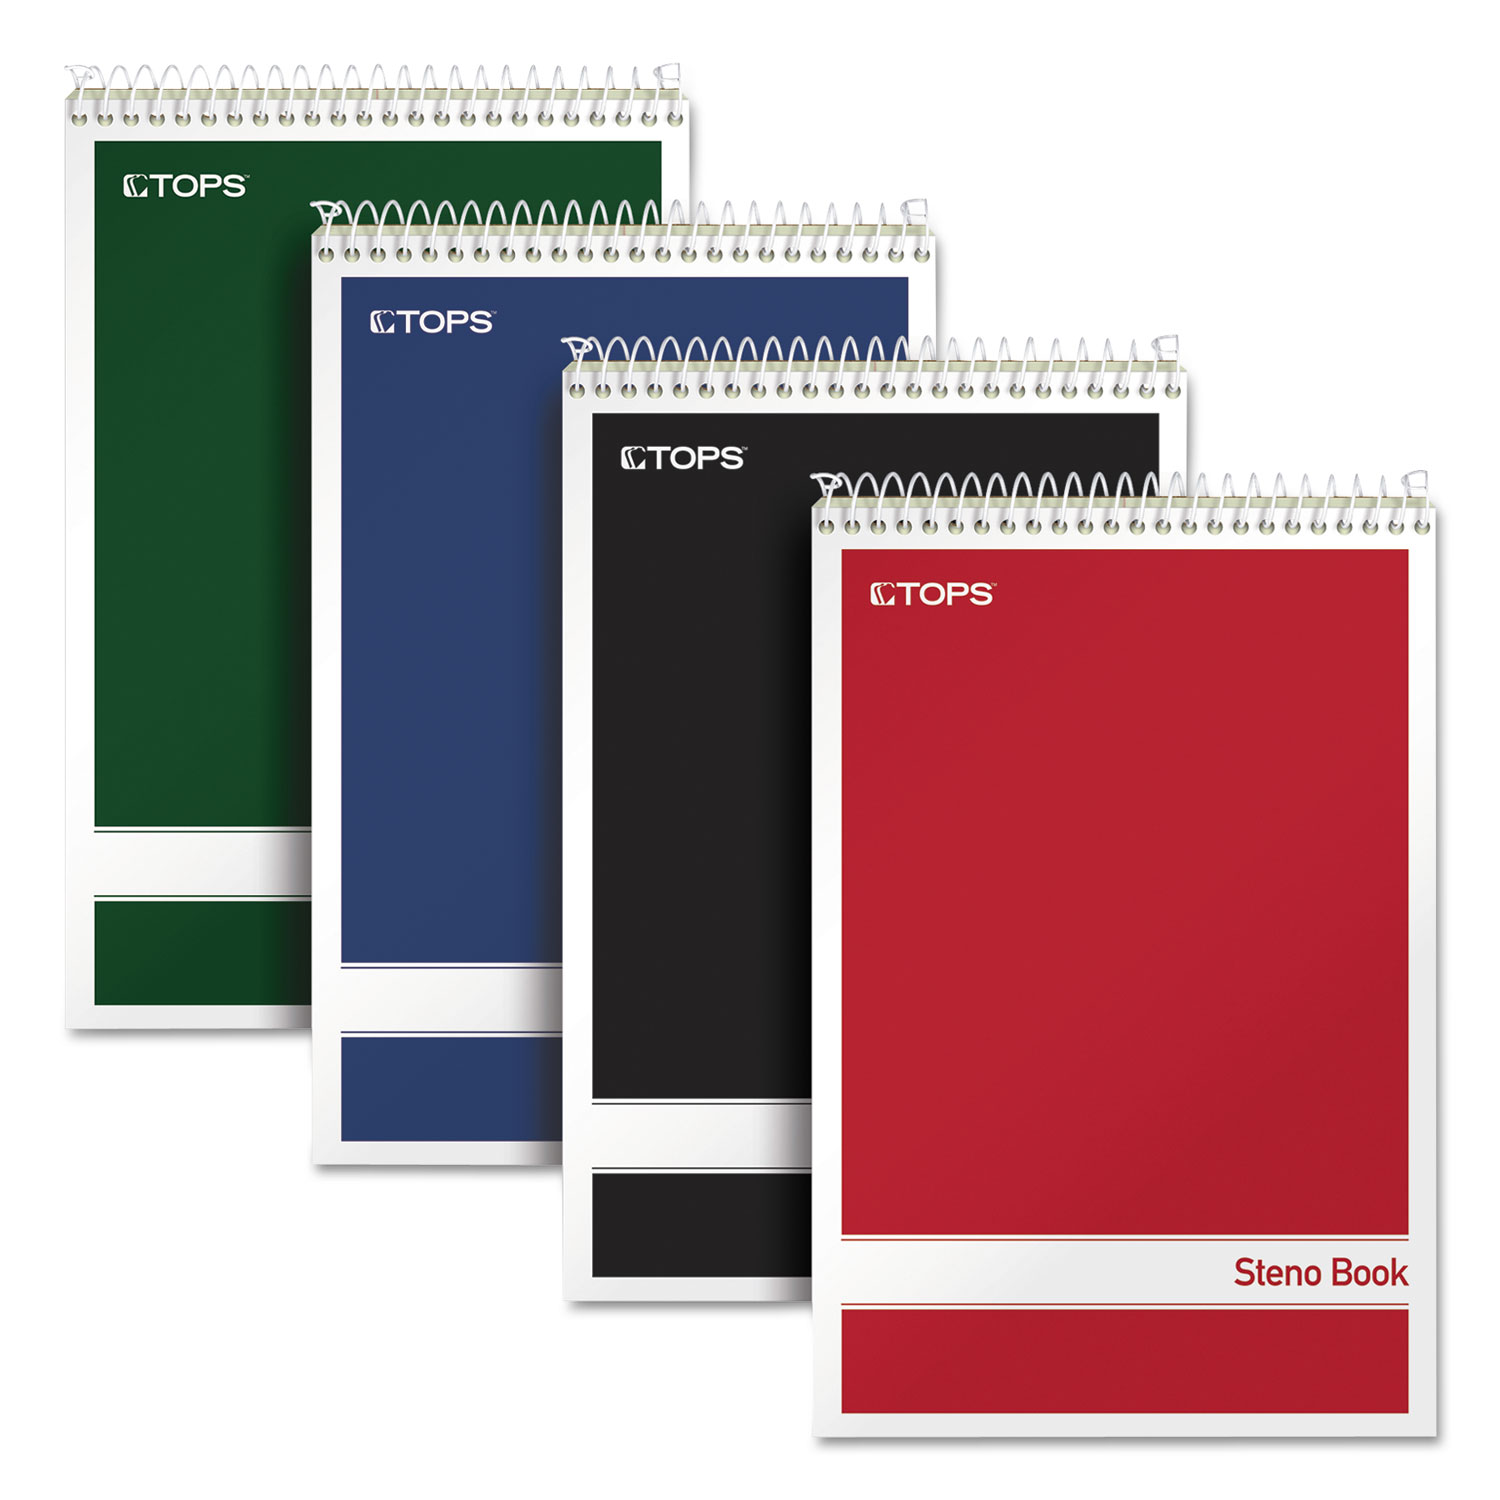  TOPS 80221 Steno Book, Gregg Rule, Assorted Covers, 6 x 9, 80 Green Tint Sheets, 4/Pack (TOP80221) 